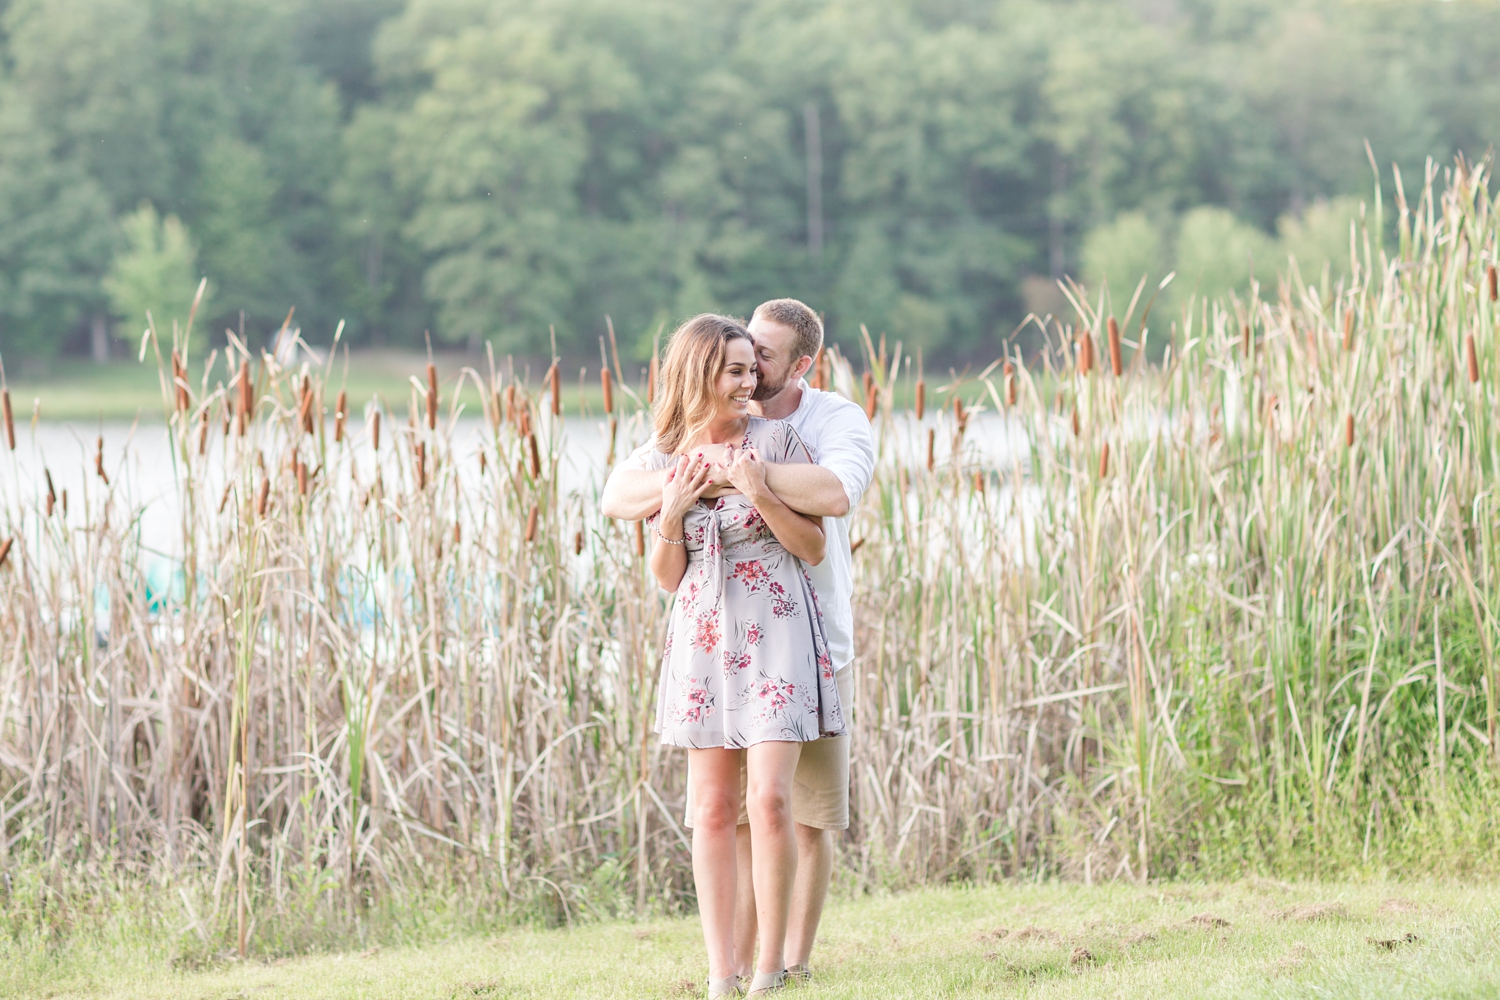  See more from   Shawn and Elise’s engagement session at Greenbrier State Park here  ! 